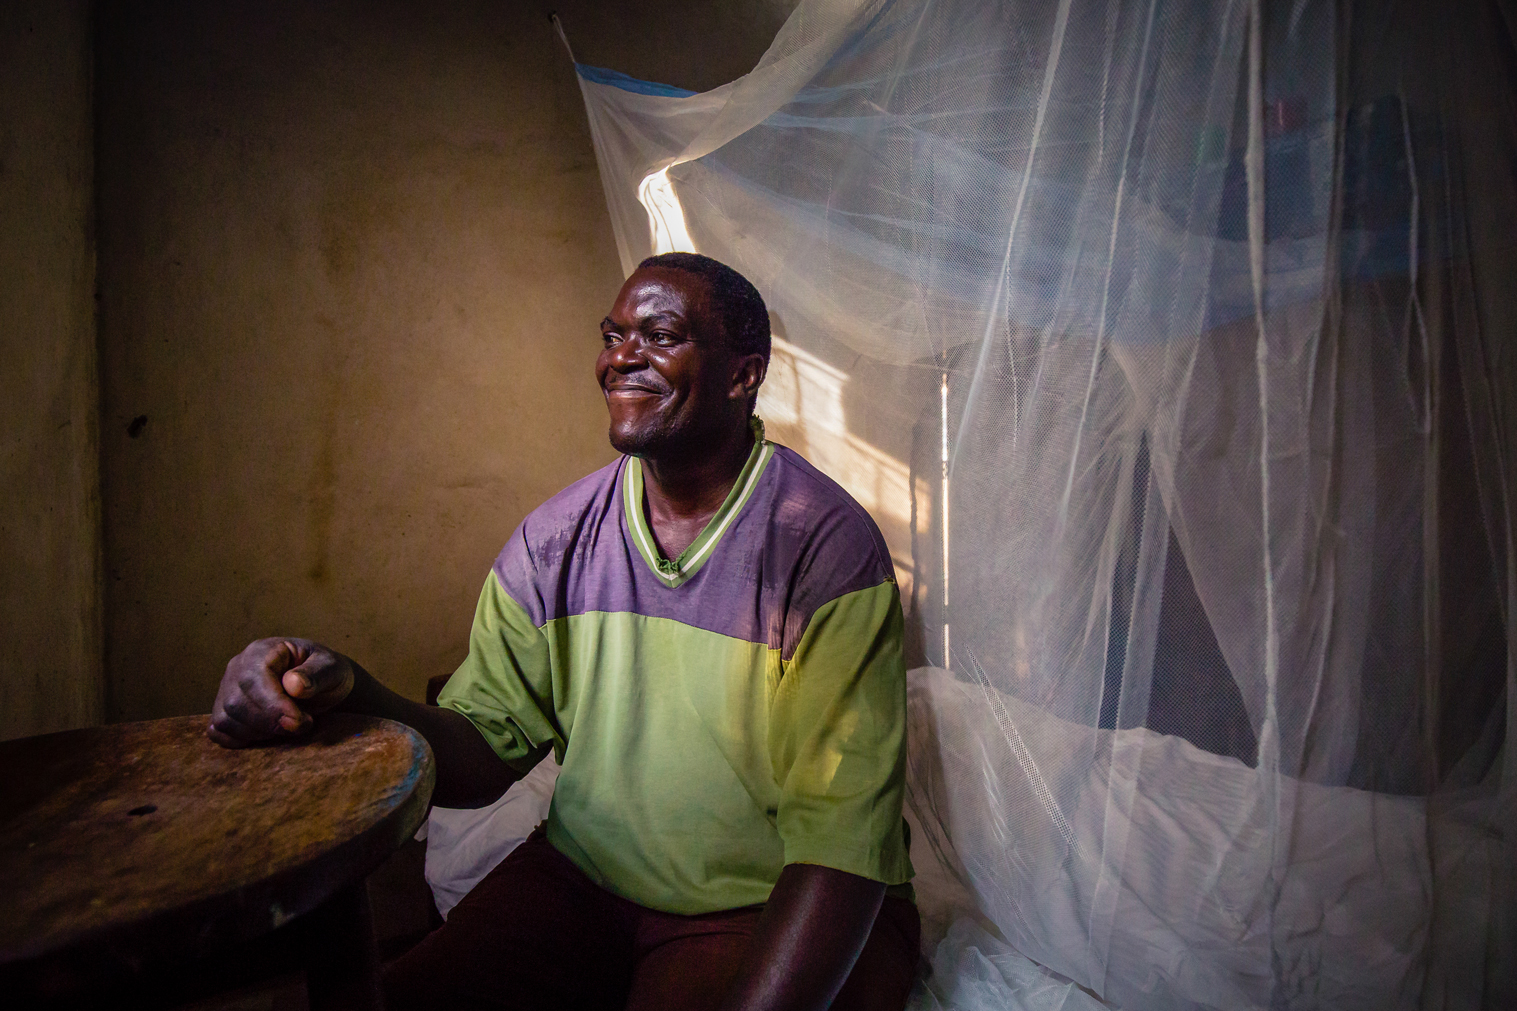  This is Timothy, a Ugandan living in a rural village near Namungalwe, Iganga District, Uganda. In all of Uganda, malaria is a constant risk, but especially so in the villages.  Here, Timothy displays his mosquito net, the first line of defense again